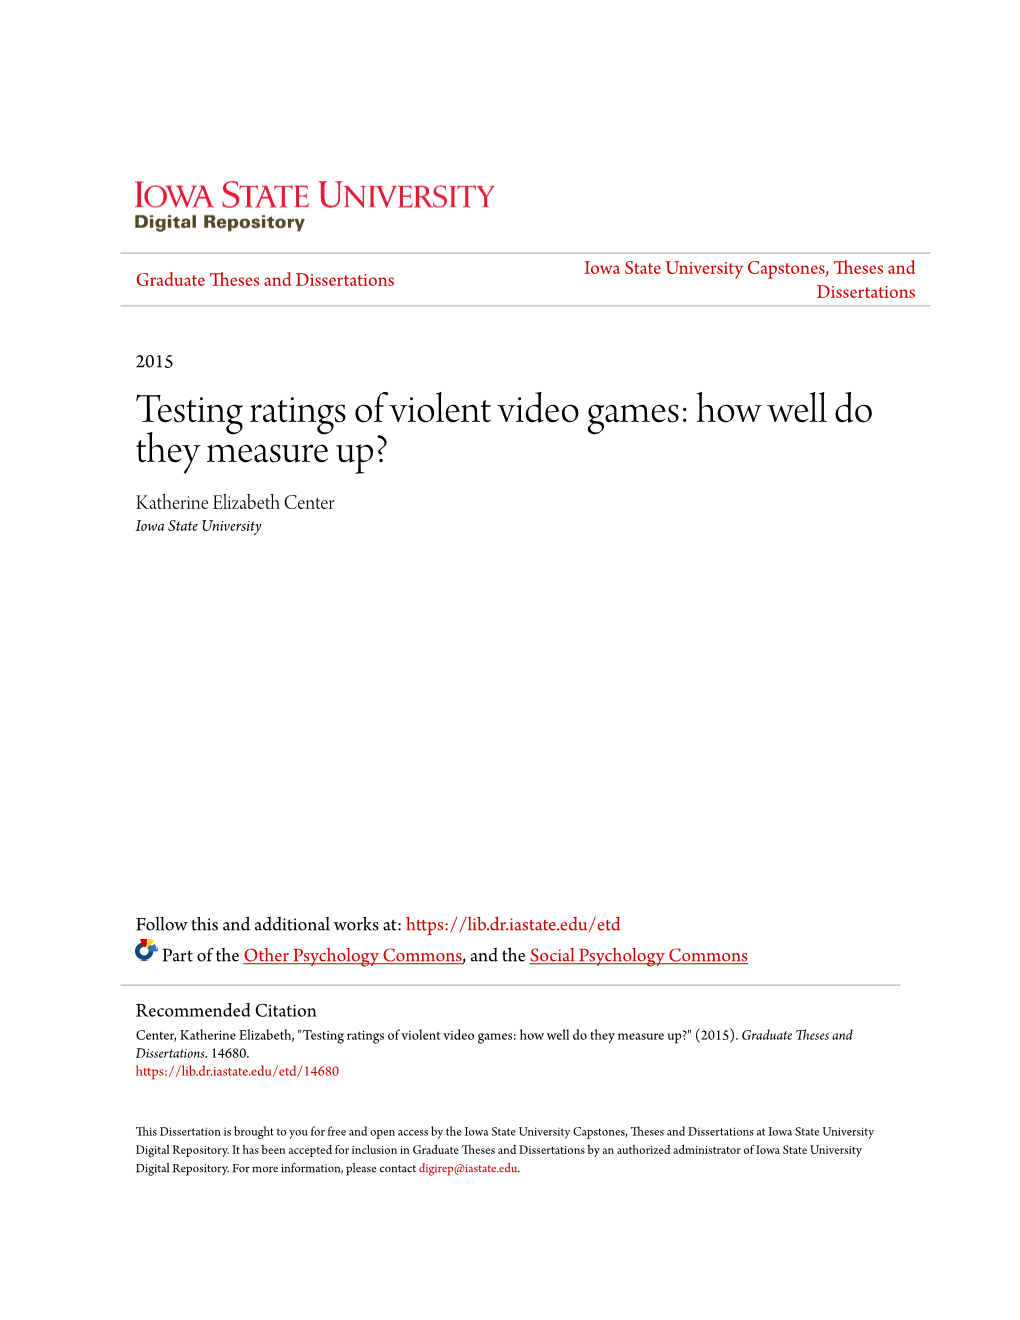 Testing Ratings of Violent Video Games: How Well Do They Measure Up? Katherine Elizabeth Center Iowa State University